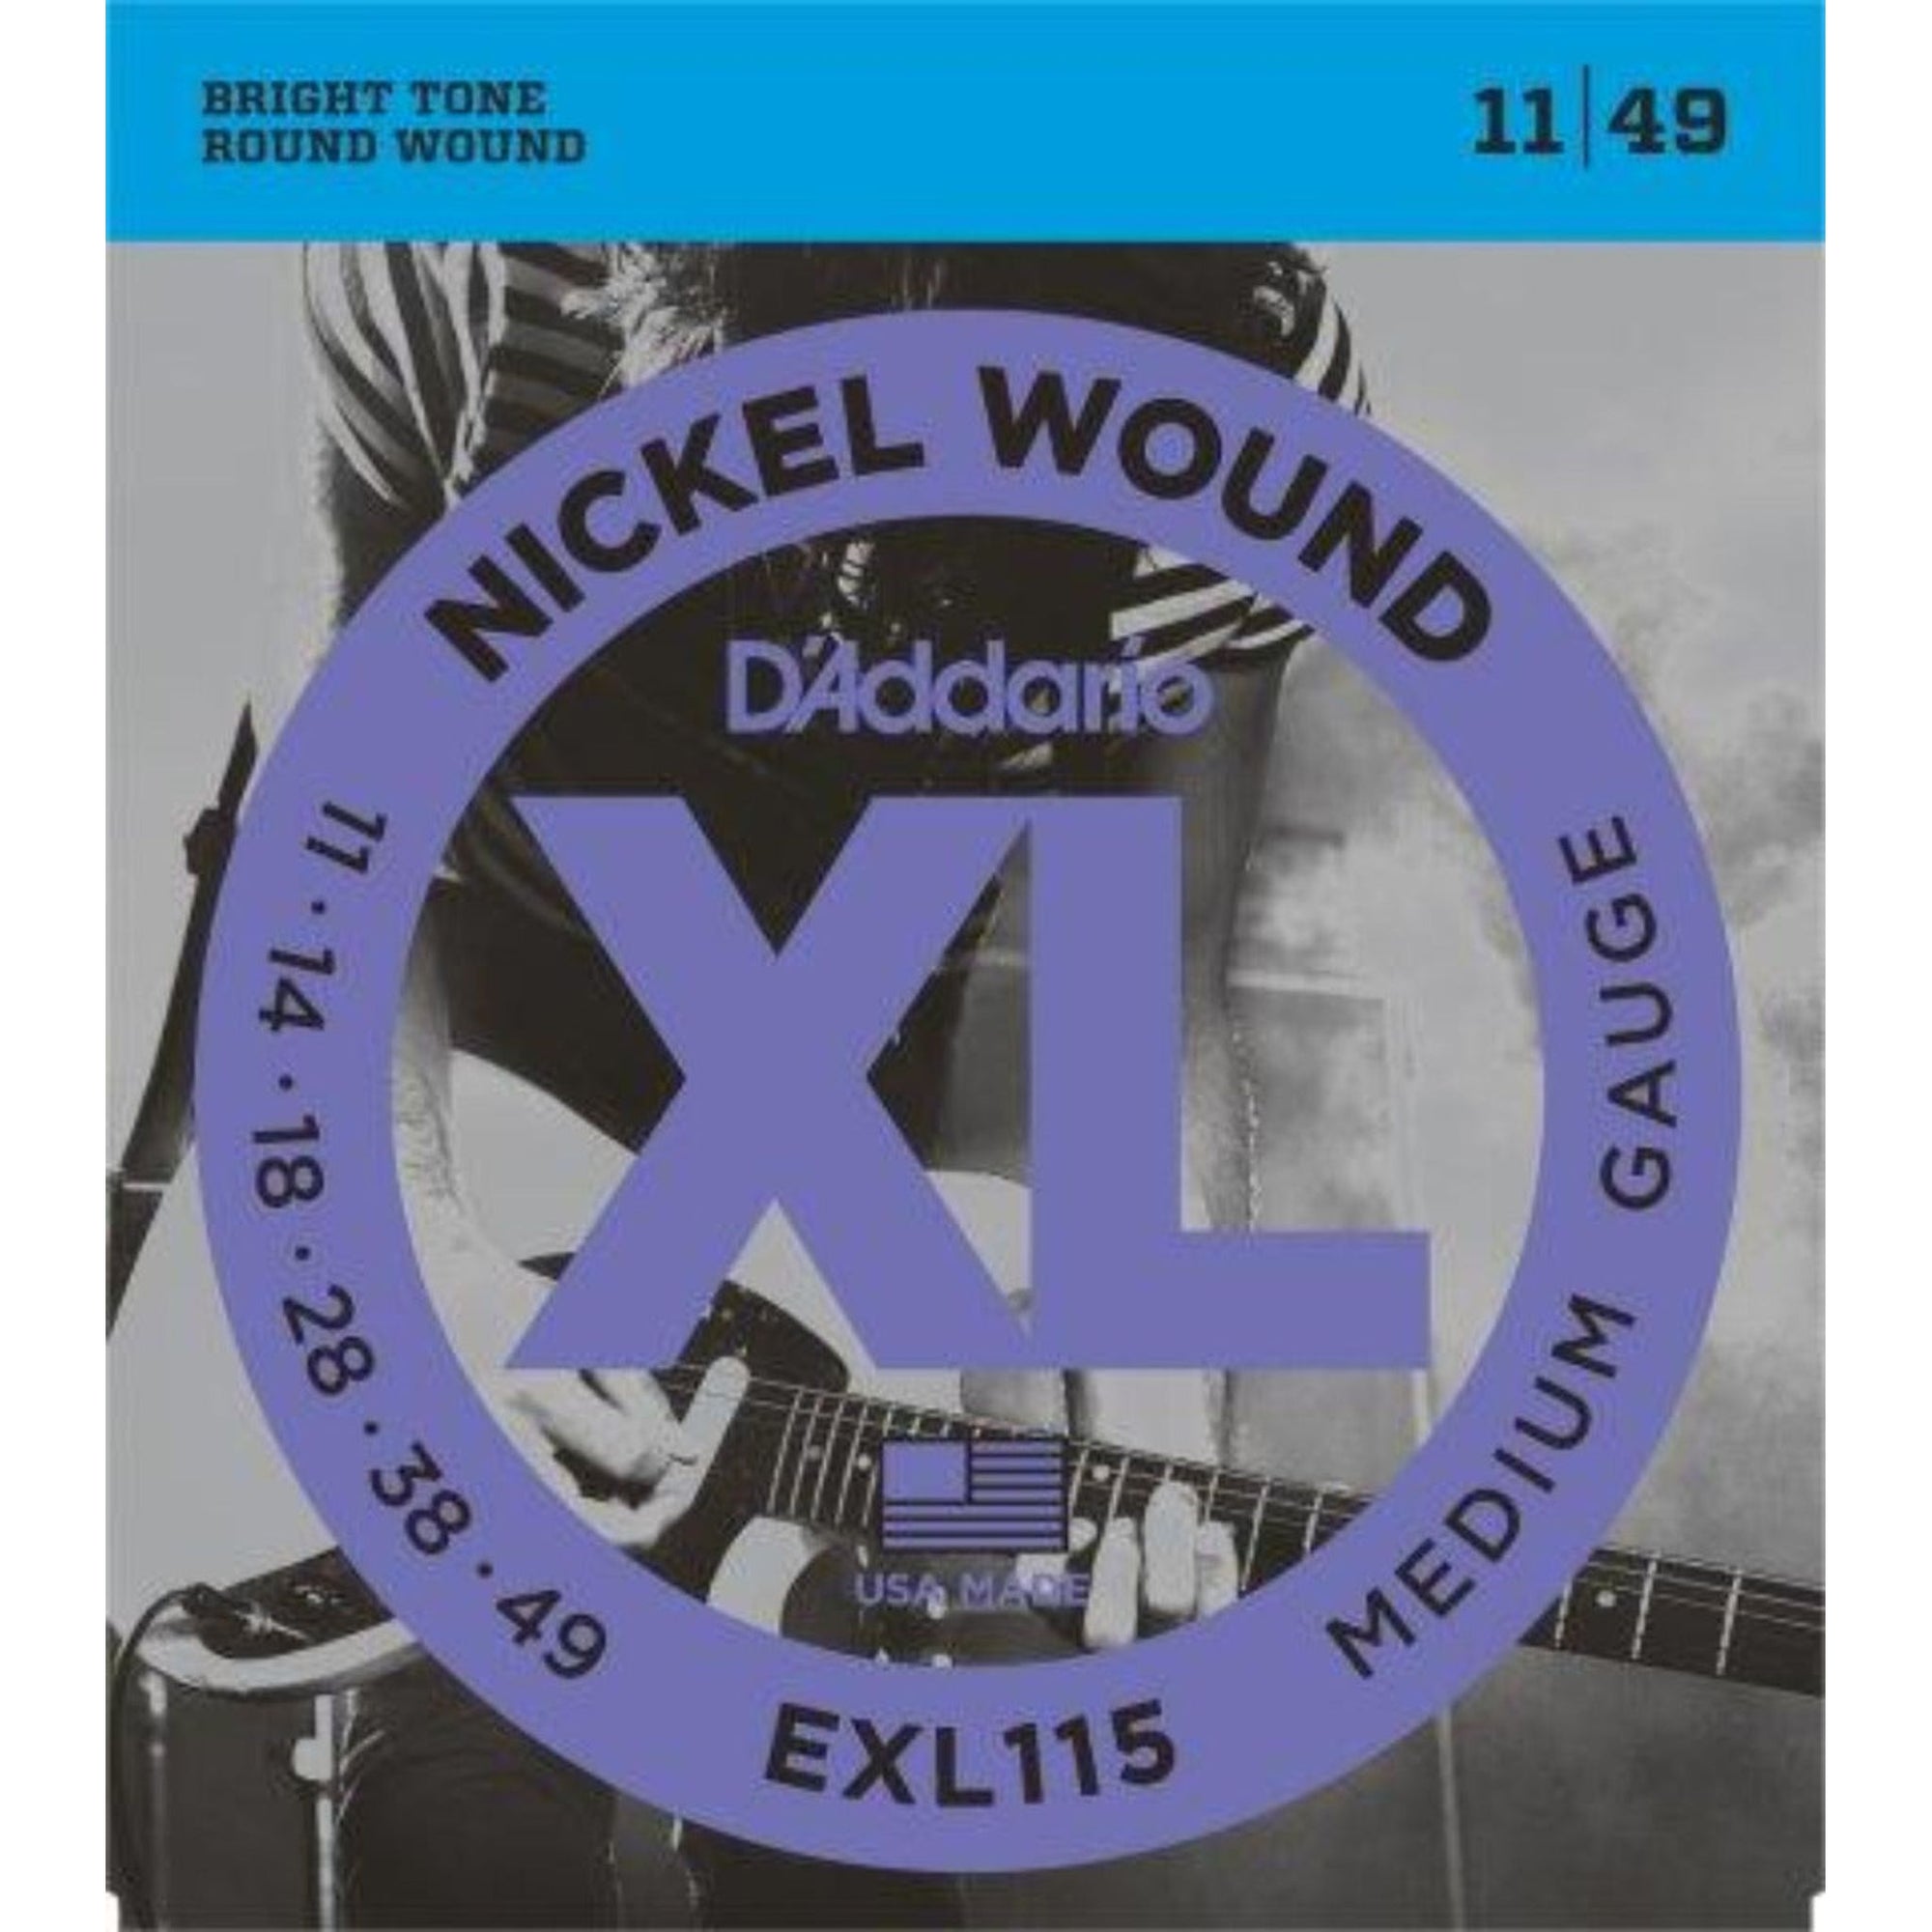 D'Addario EXL115 Electric Guitar String are the popular choice for players who prefer moderate flexibility and a full, beefy tone.